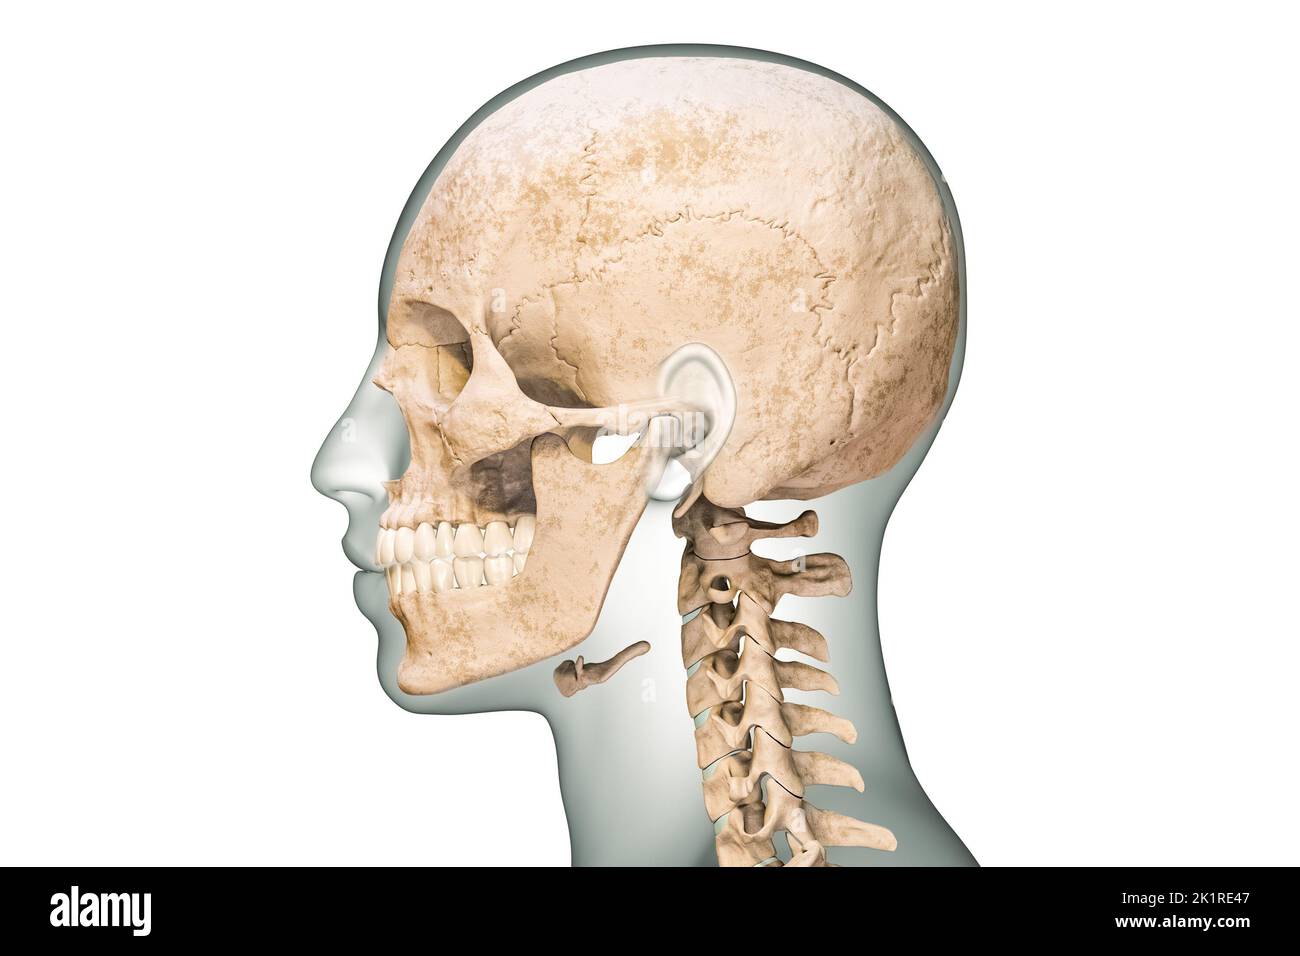 Lateral or profile view of human skull bones with cervical vertebrae and body contours 3D rendering illustration isolated on white background. Anatomy Stock Photo